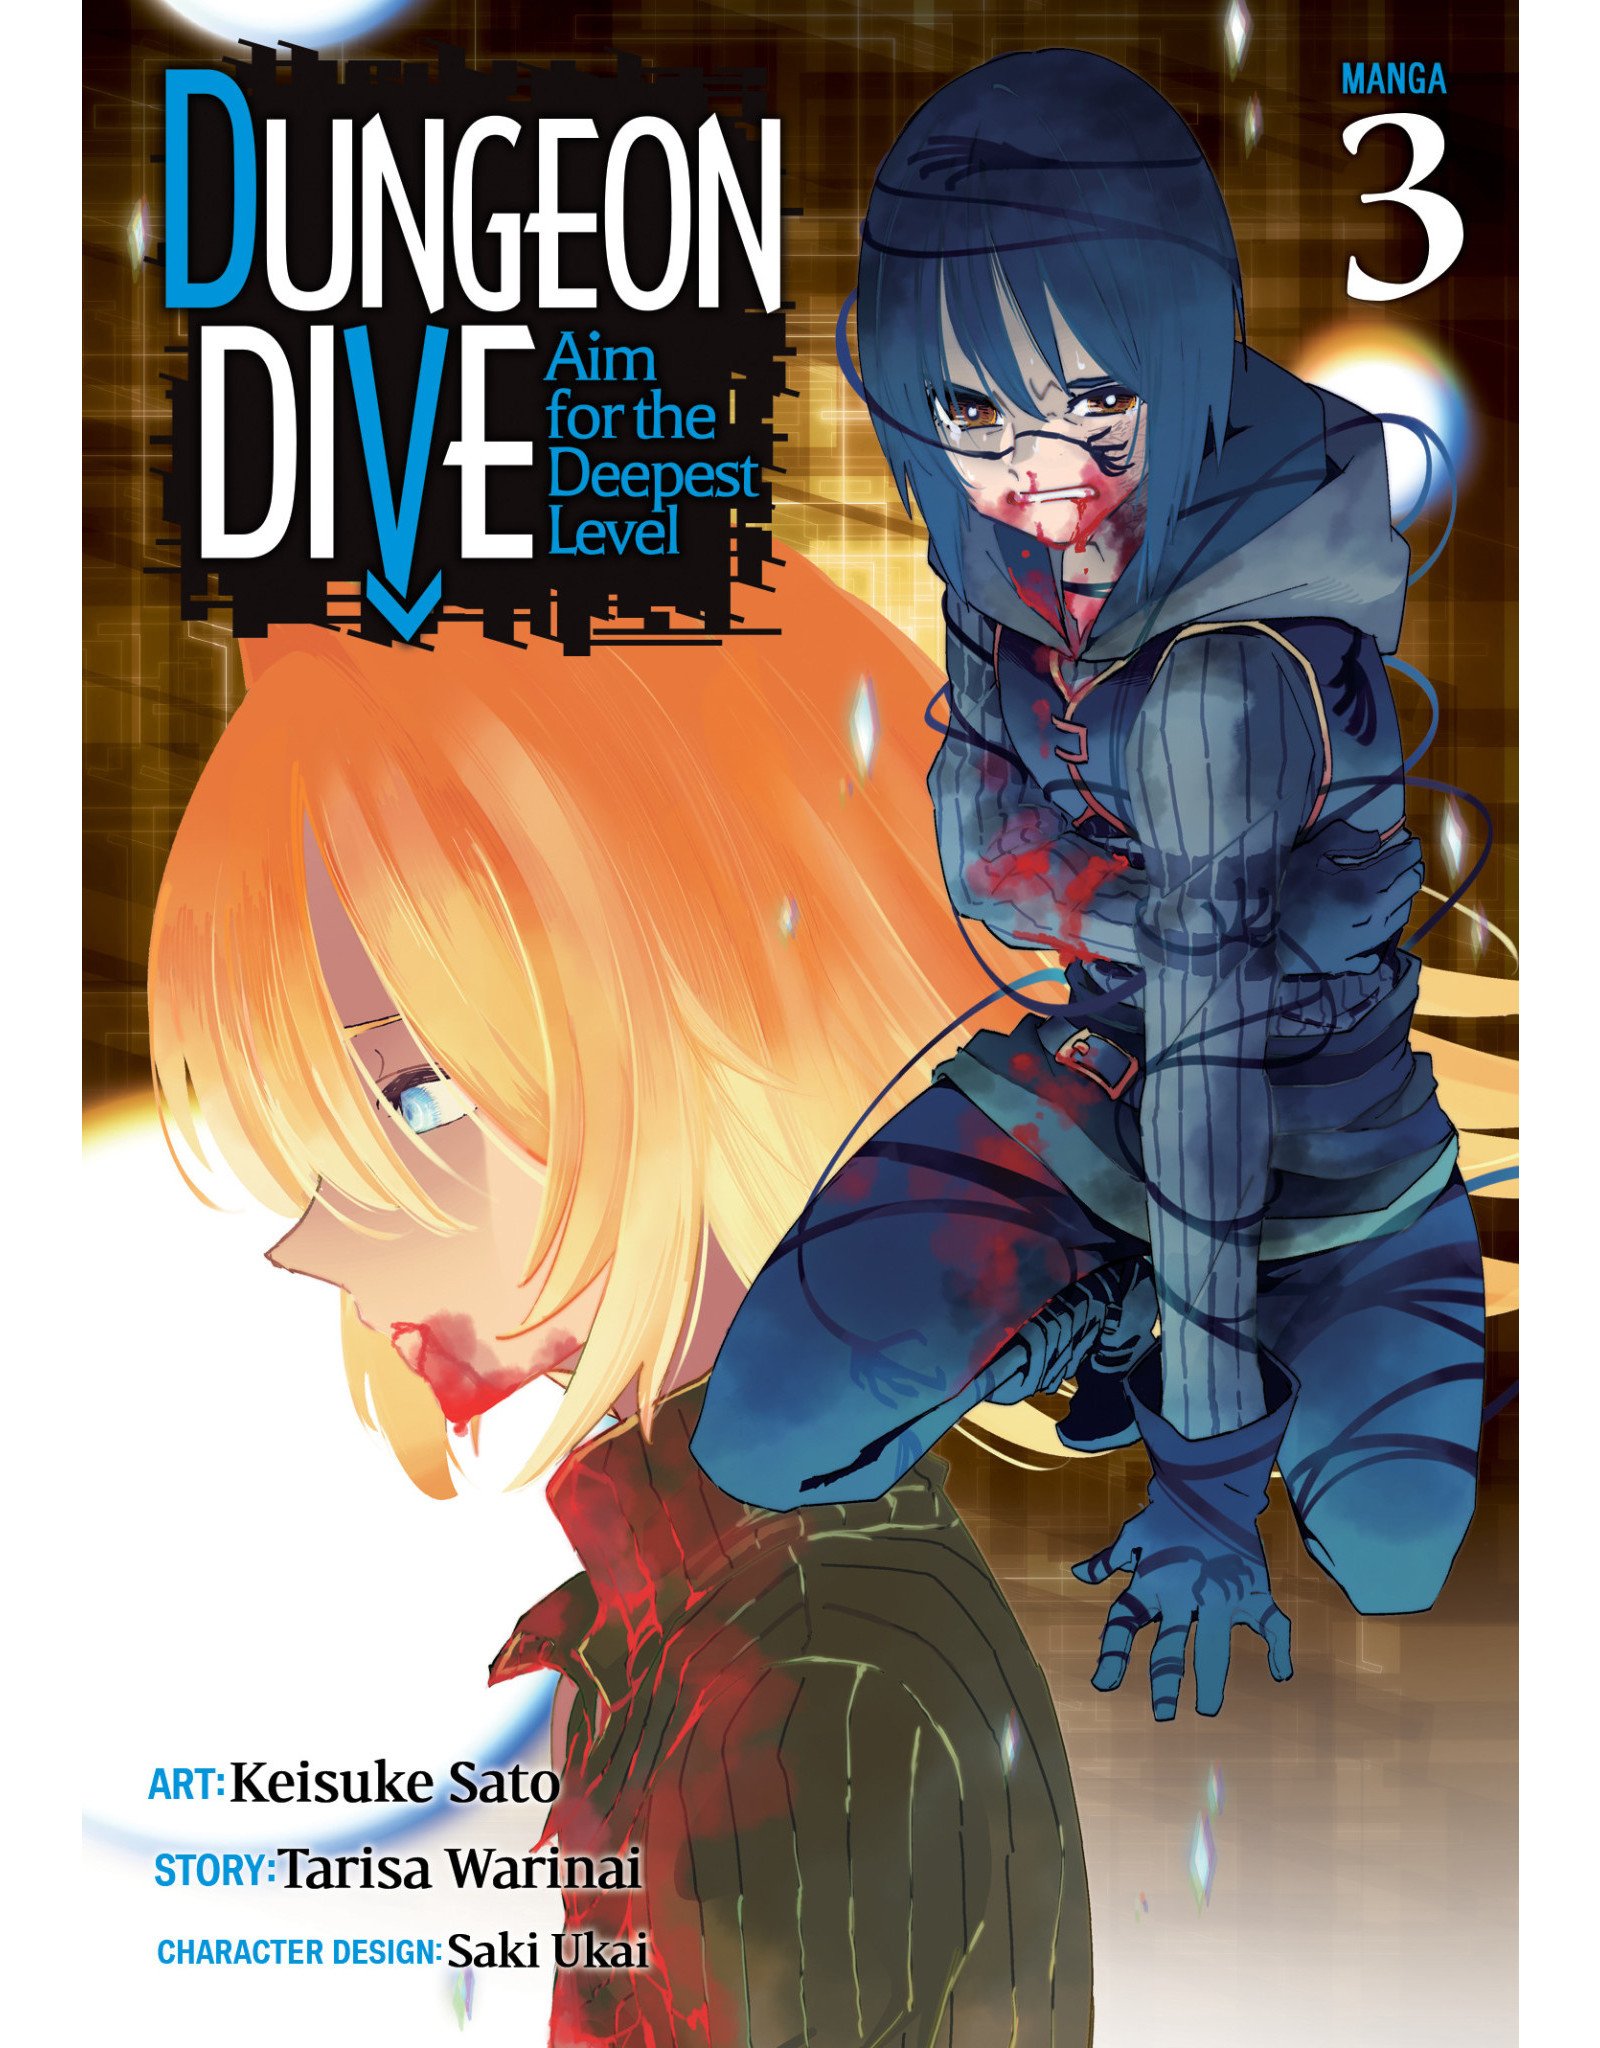 Dungeon Dive: Aim for the Deepest Level 03 (English) - Manga